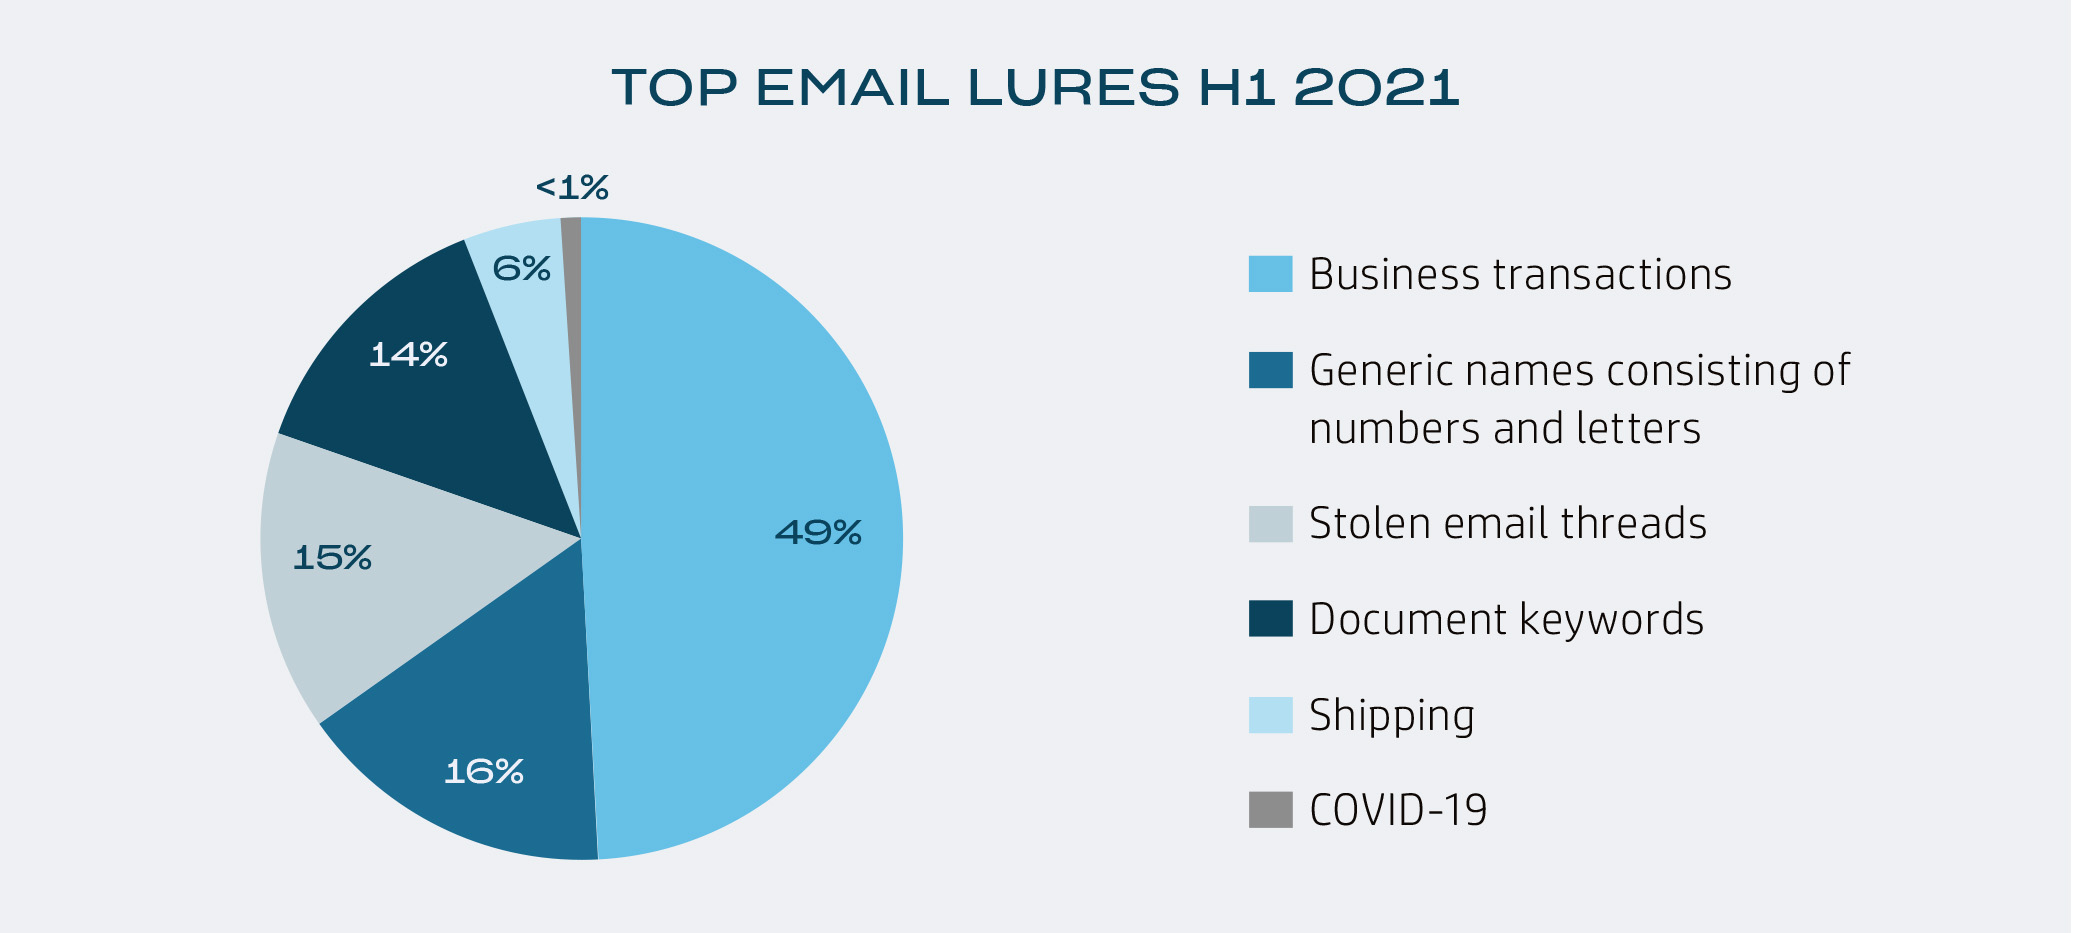 Top email lures